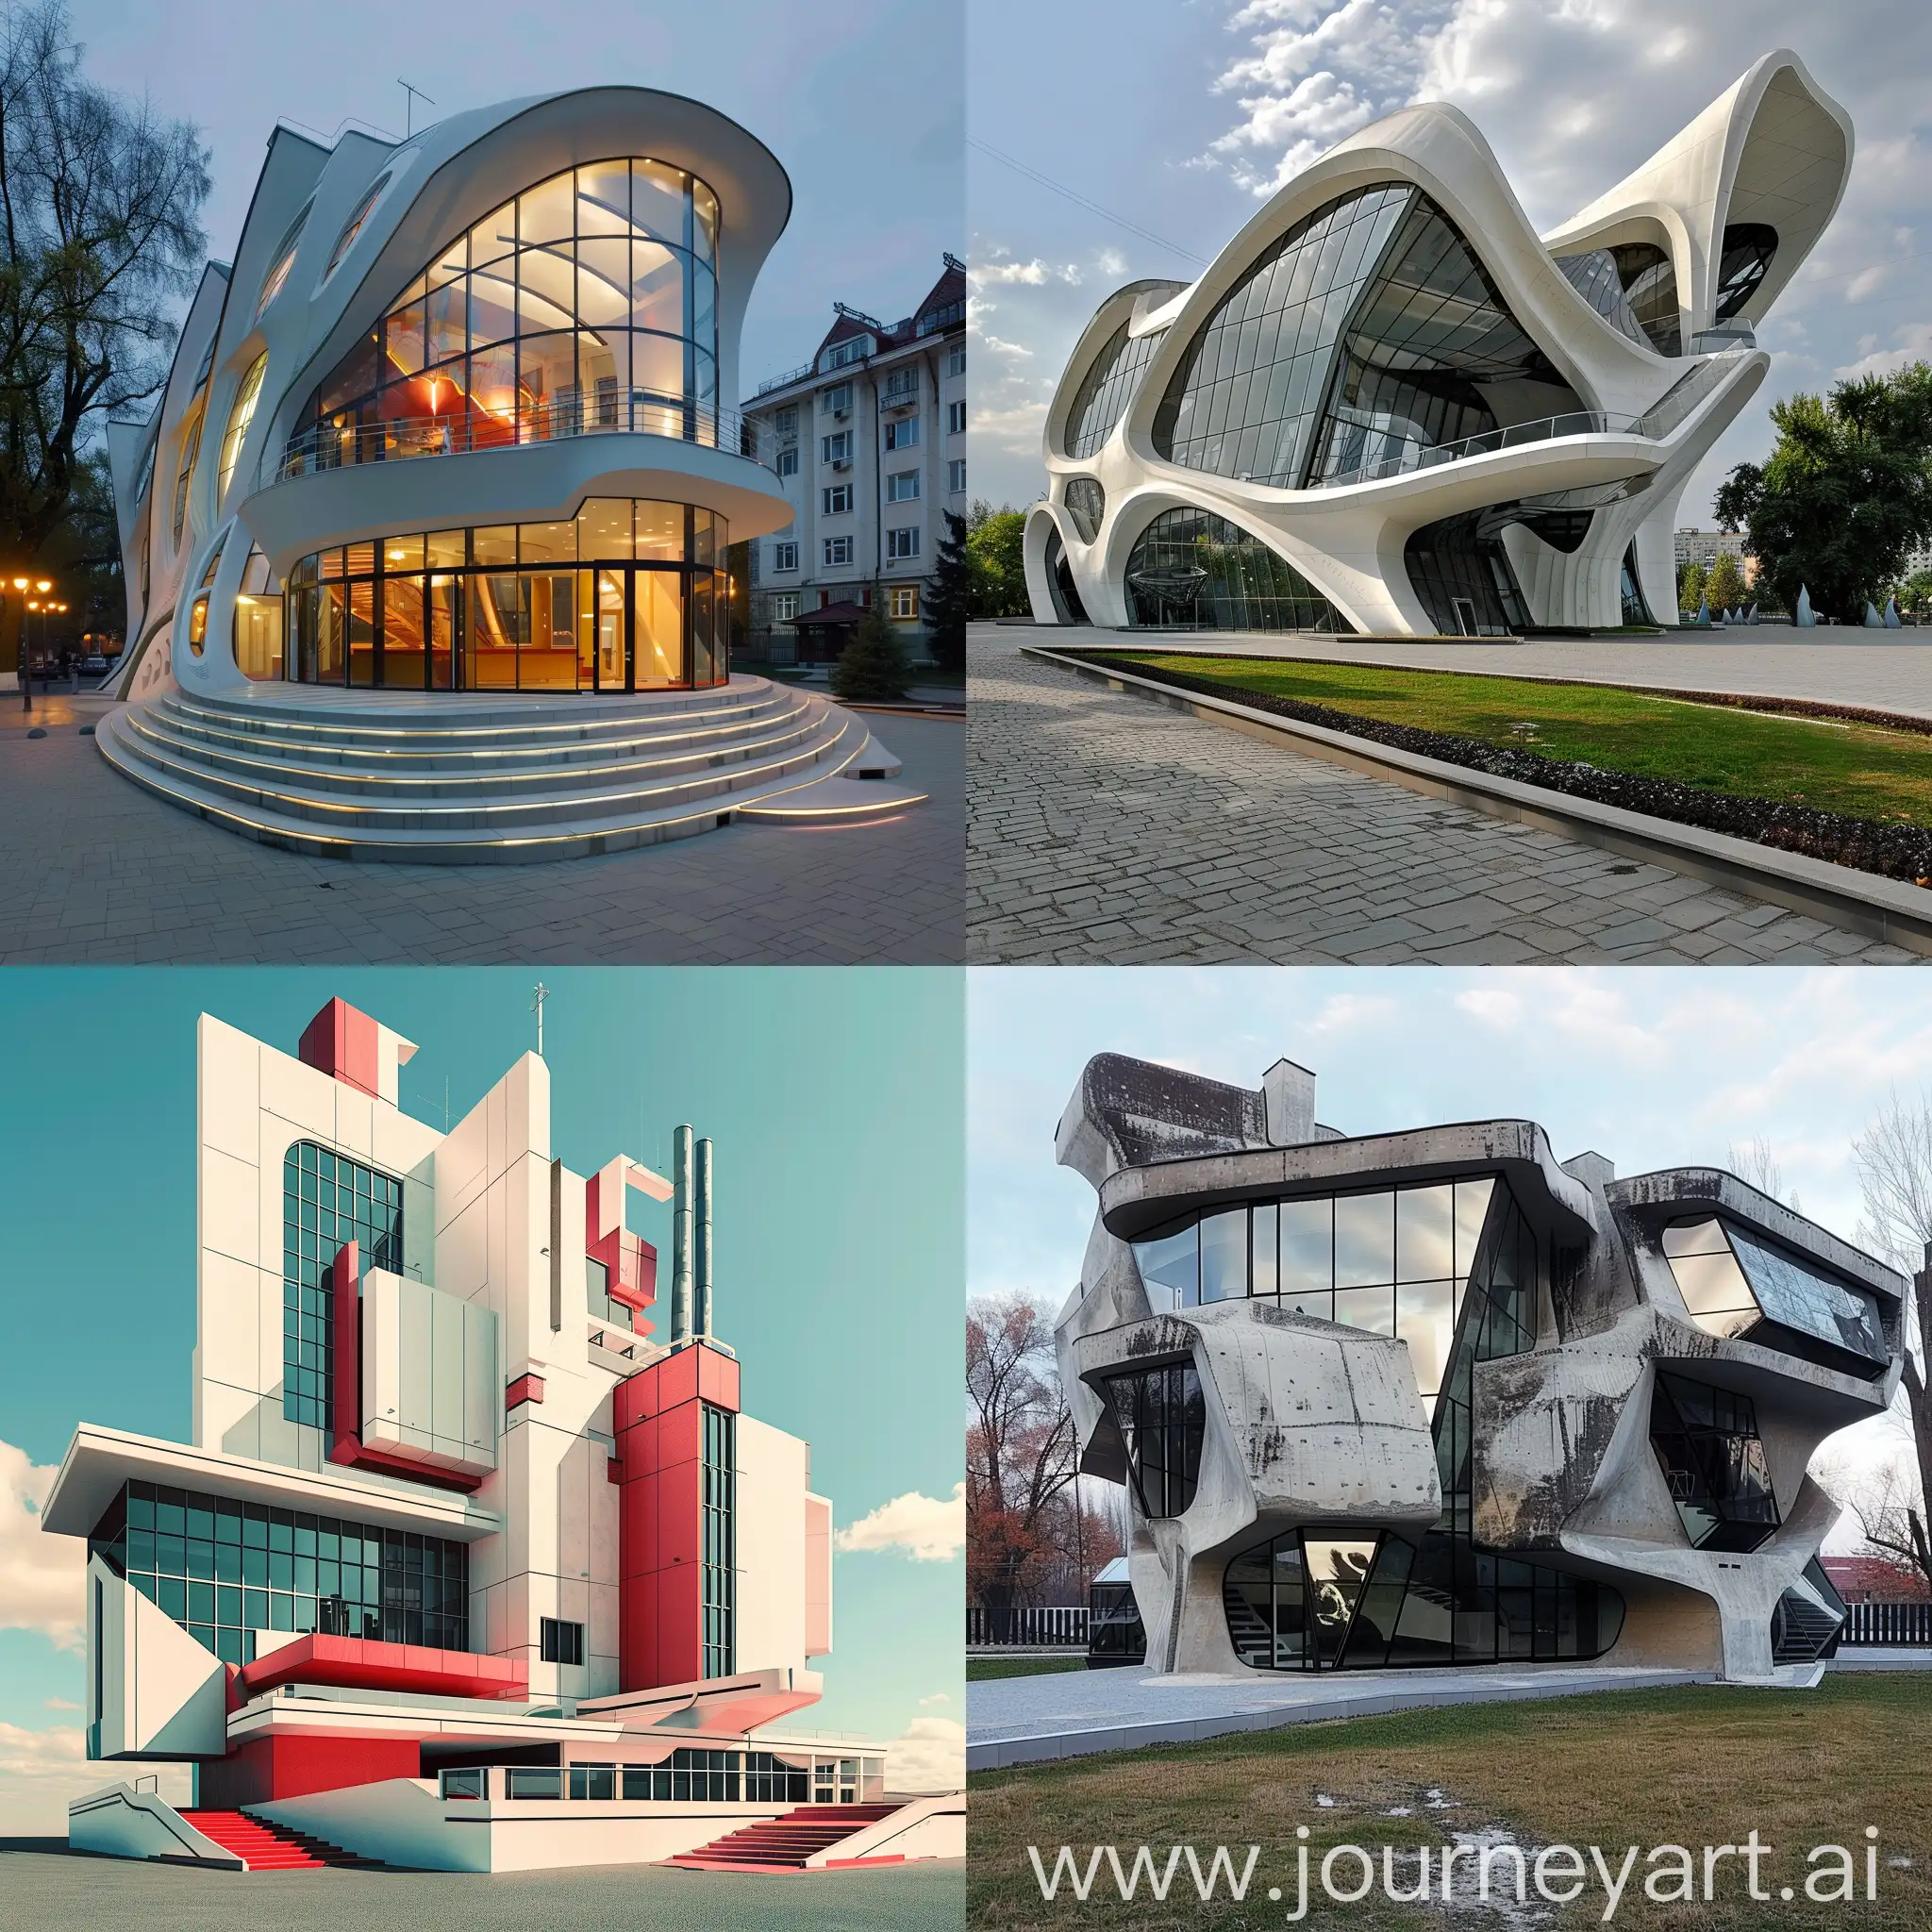 Fantastical-Fusion-of-Constructivism-and-Futurism-in-Modern-Architecture